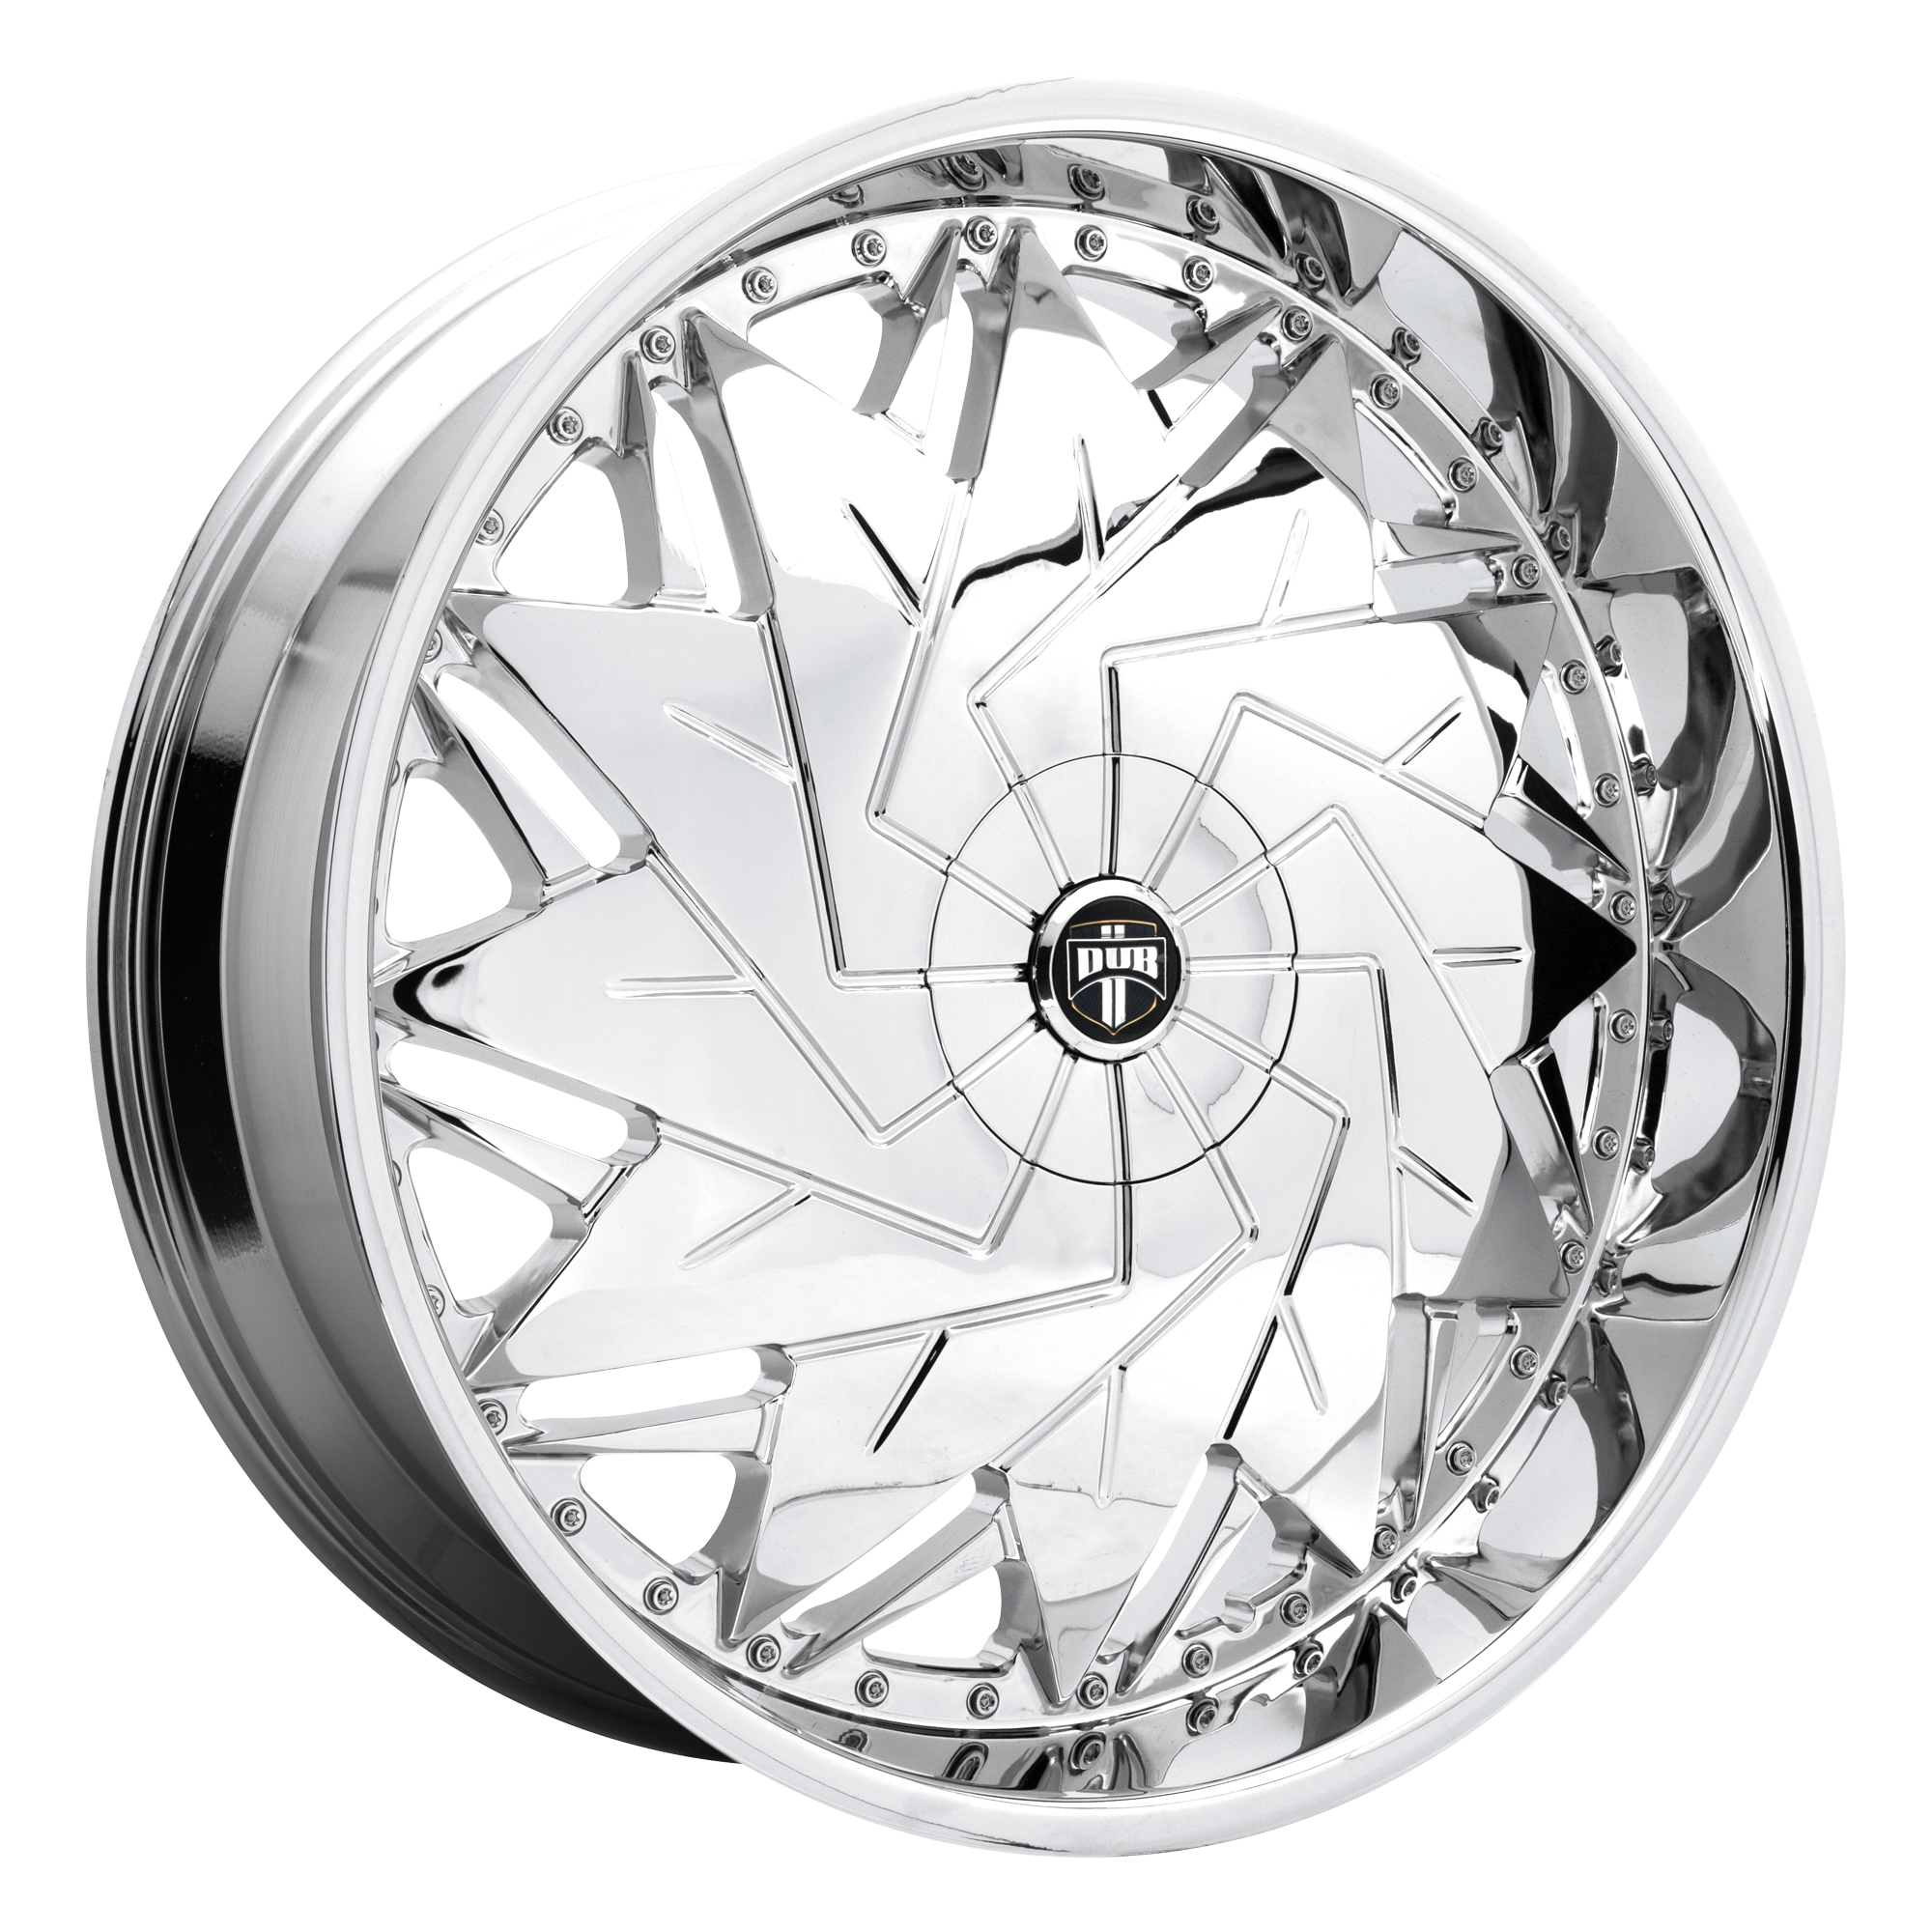 DAZR 26x9 5x120.65/5x127.00 CHROME PLATED (1 mm) - Tires and Engine Performance